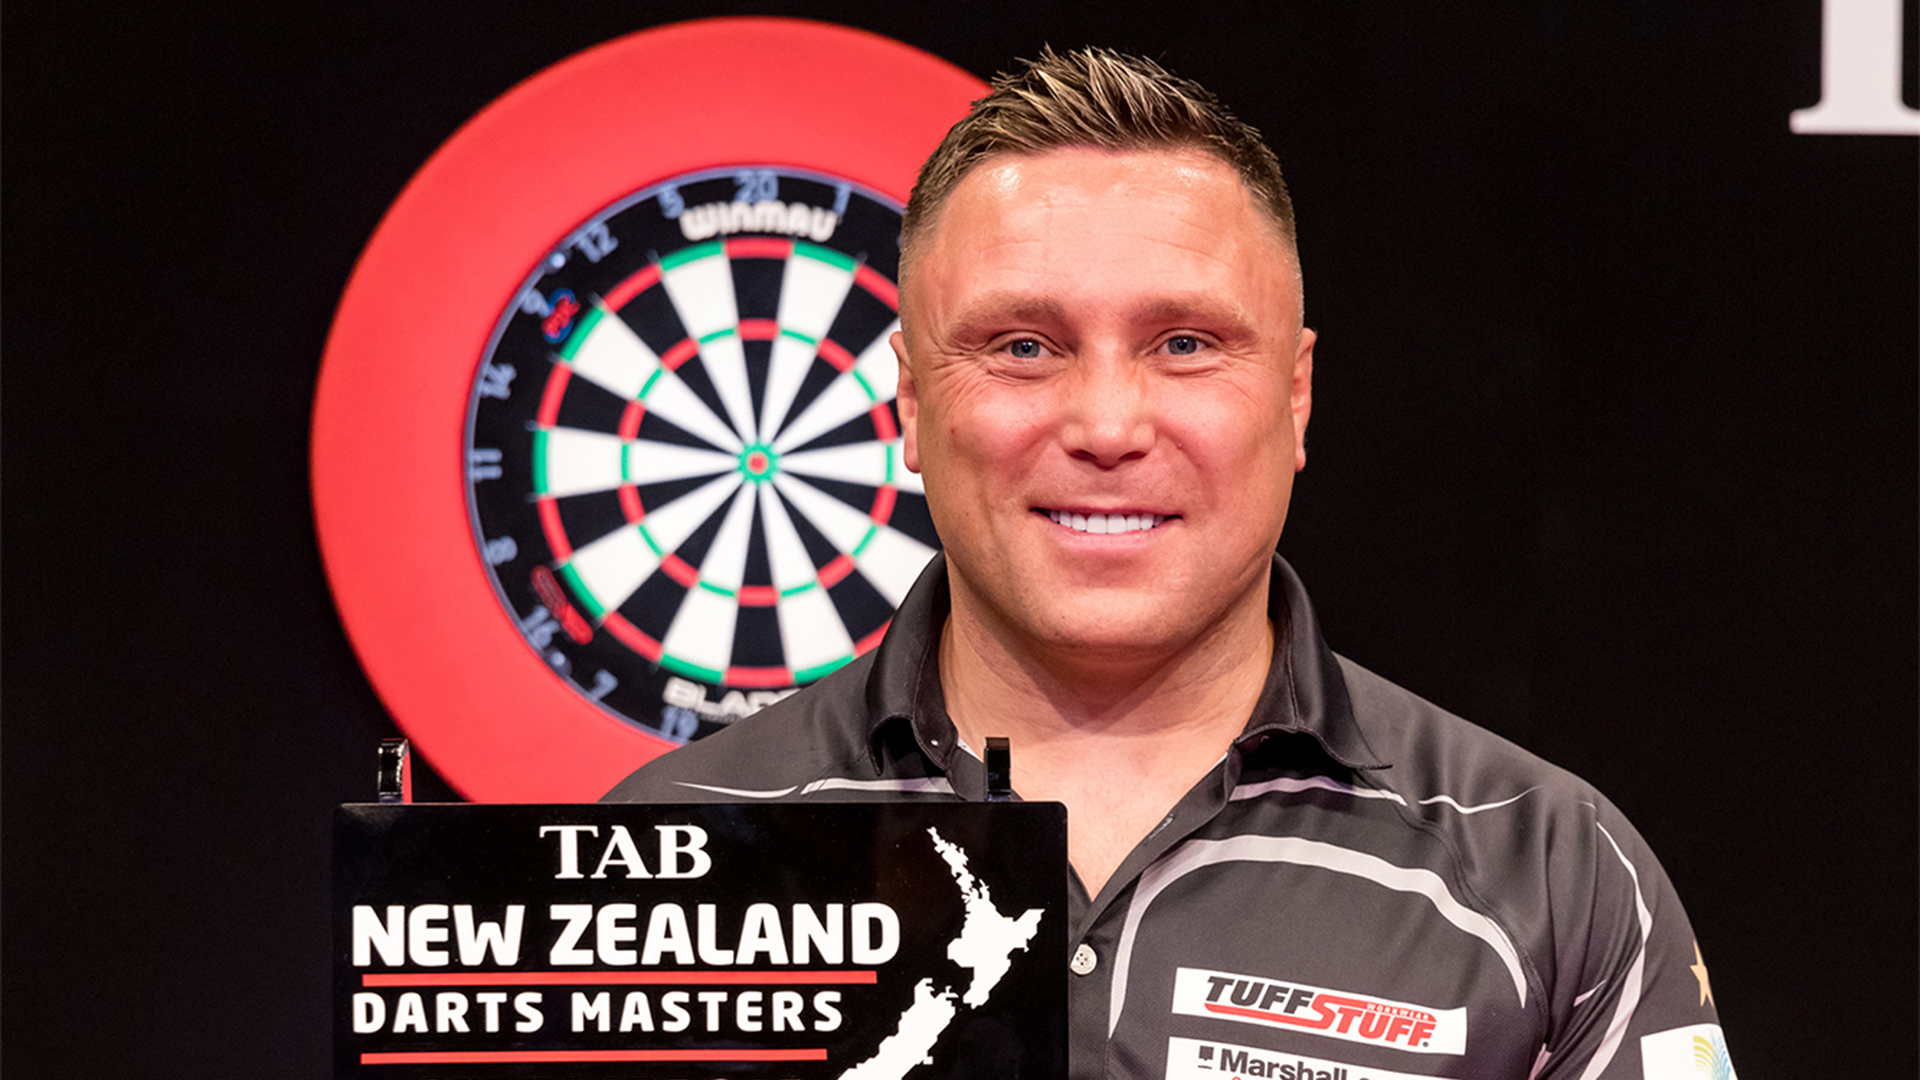 New Zealand Darts Masters 2022 Draw, schedule, results, odds and TV coverage details